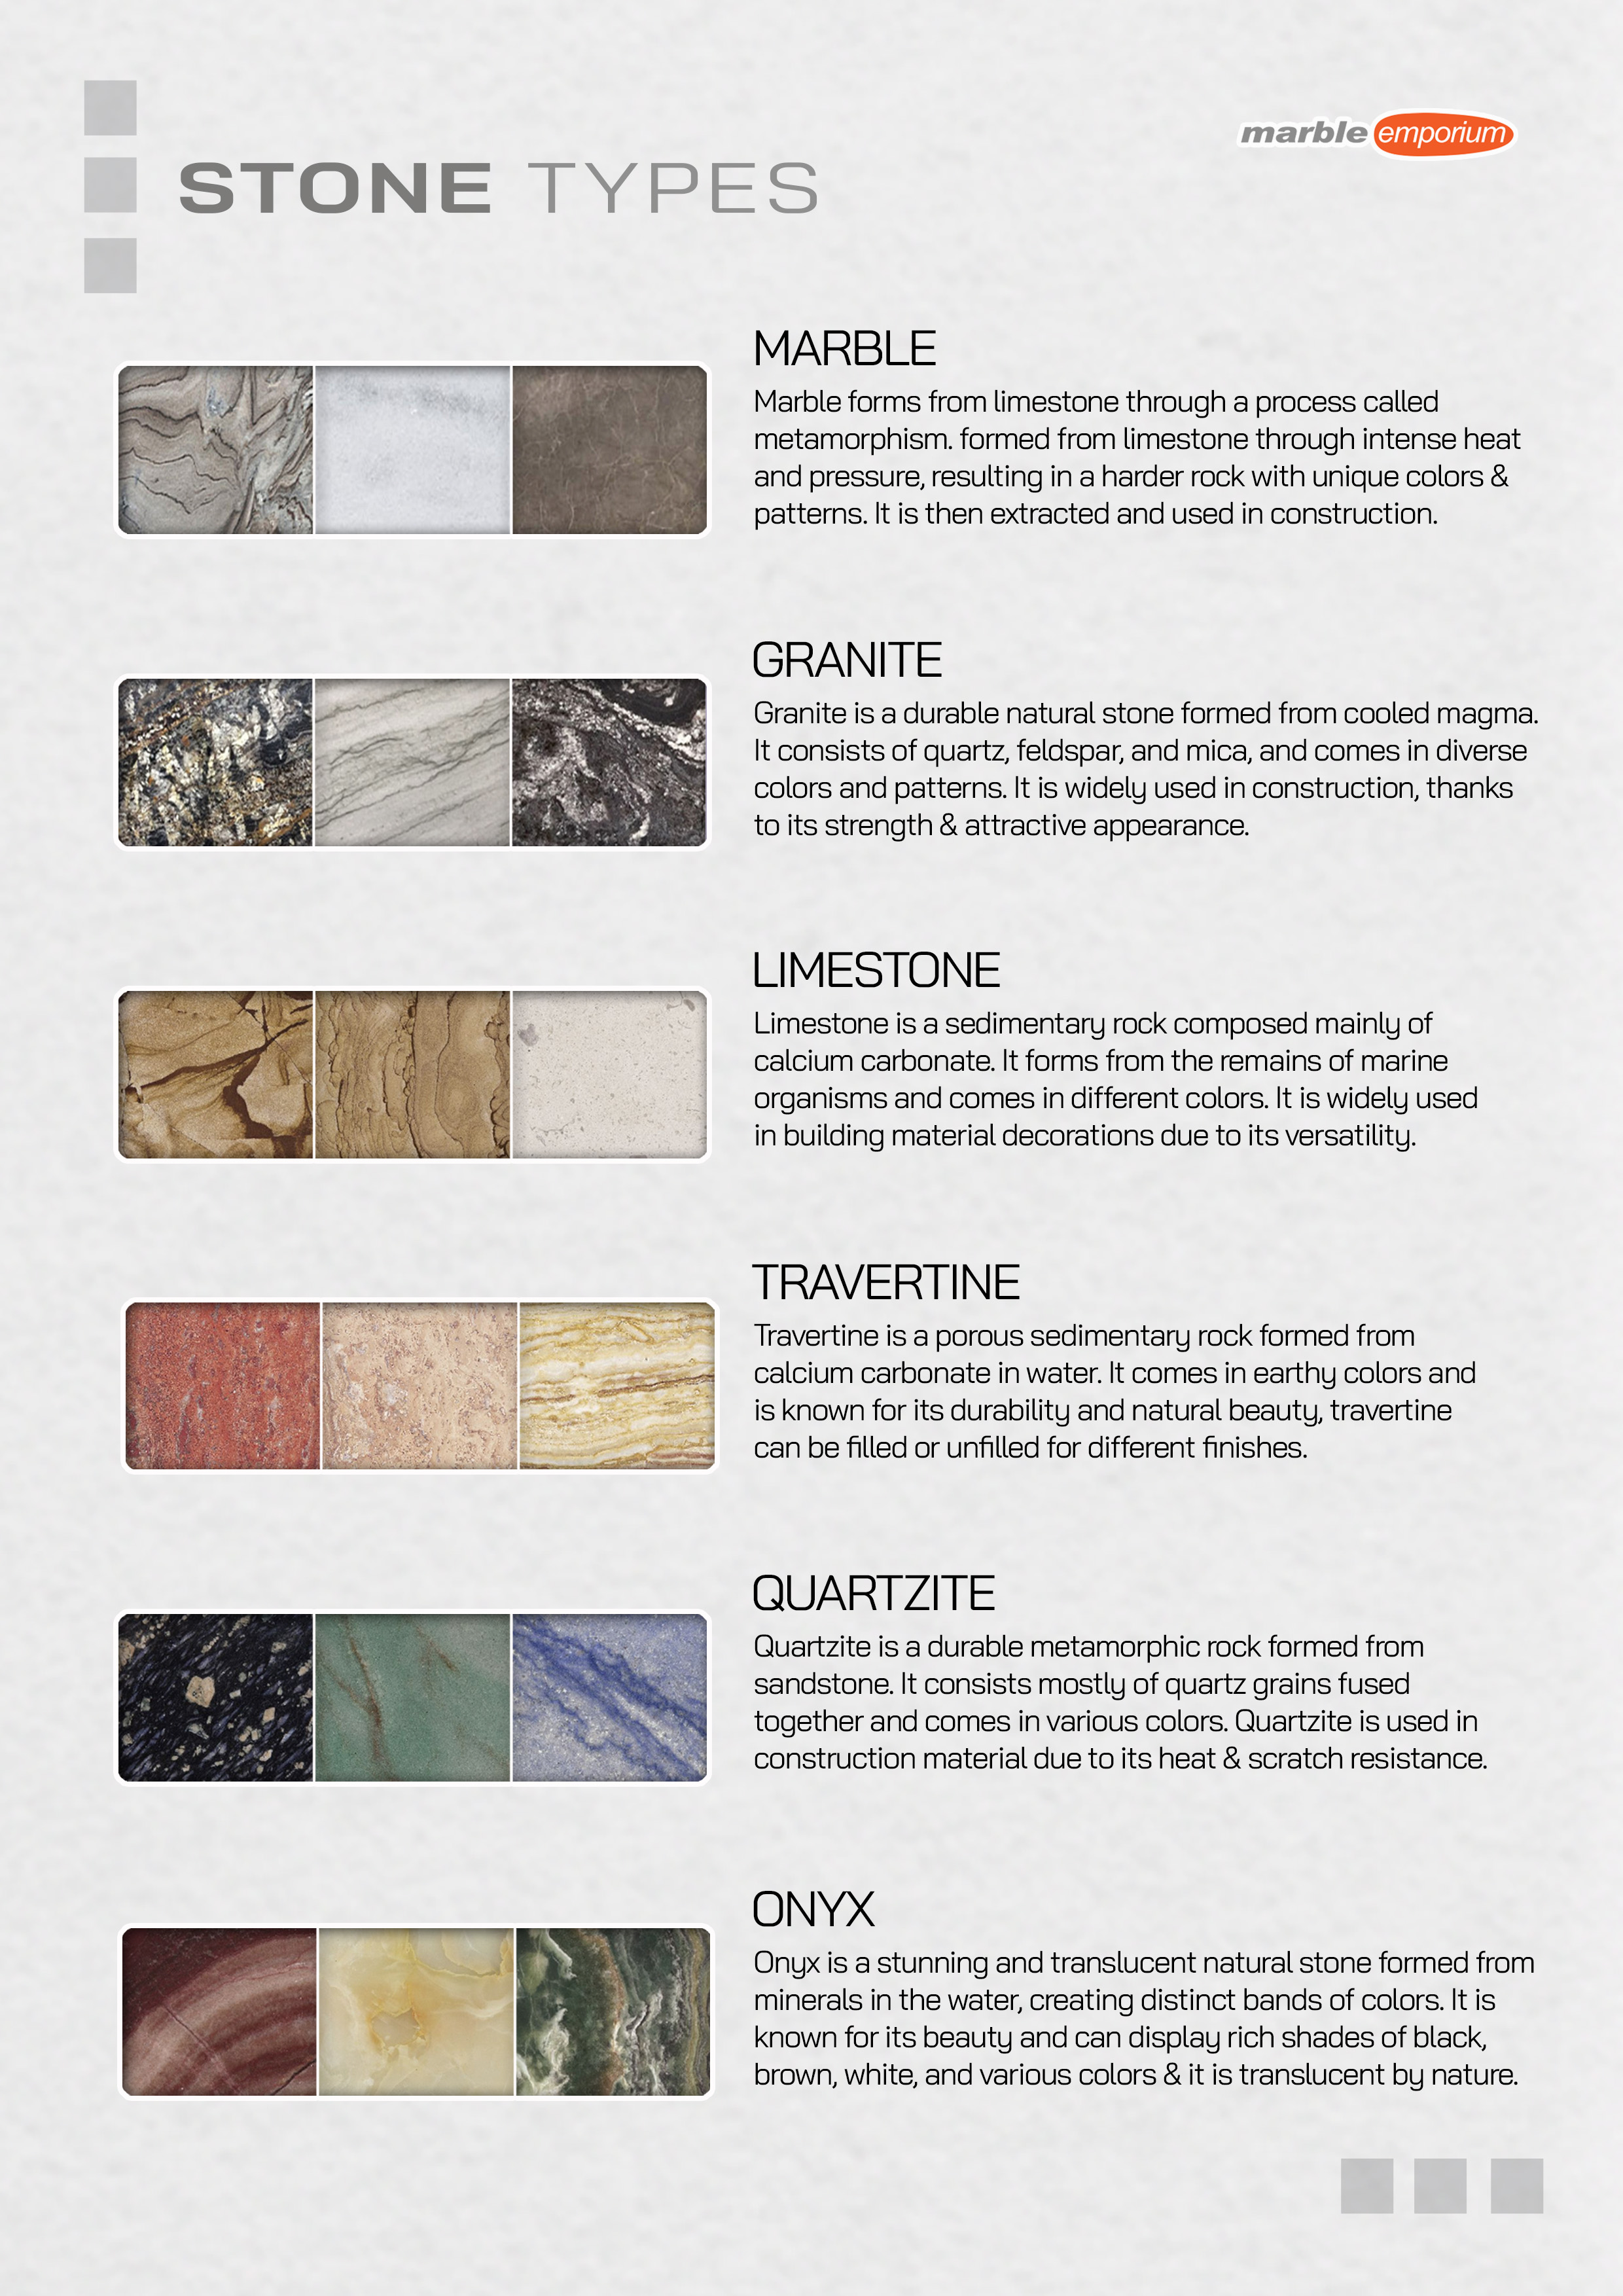 Marble Emporium | How we work page 06 - Stone types | MARBLE - Marble forms from limestone through a process called metamorphism. formed from limestone through intense heat and pressure, resulting in a harder rock with unique colors & patterns. It is then extracted and used in construction. | GRANITE - Granite is a durable natural stone formed from cooled magma. It consists of quartz, feldspar, and mica, and comes in diverse colors and patterns. It is widely used in construction, thanks to its strength & attractive appearance. | LIMESTONE - Limestone is a sedimentary rock composed mainly of calcium carbonate. It forms from the remains of marine organisms and comes in different colors. It is widely used in building material decorations due to its versatility. | TRAVERTINE - Travertine is a porous sedimentary rock formed from calcium carbonate in water. It comes in earthy colors and is known for its durability and natural beauty, travertine can be filled or unfilled for different finishes. | QUARTZITE - Quartzite is a durable metamorphic rock formed from sandstone. It consists mostly of quartz grains fused together and comes in various colors. Quartzite is used in construction material due to its heat & scratch resistance. | ONYX - Onyx is a stunning and translucent natural stone formed from minerals in the water, creating distinct bands of colors. It is known for its beauty and can display rich shades of black, brown, white, and various colors & it is translucent by nature.